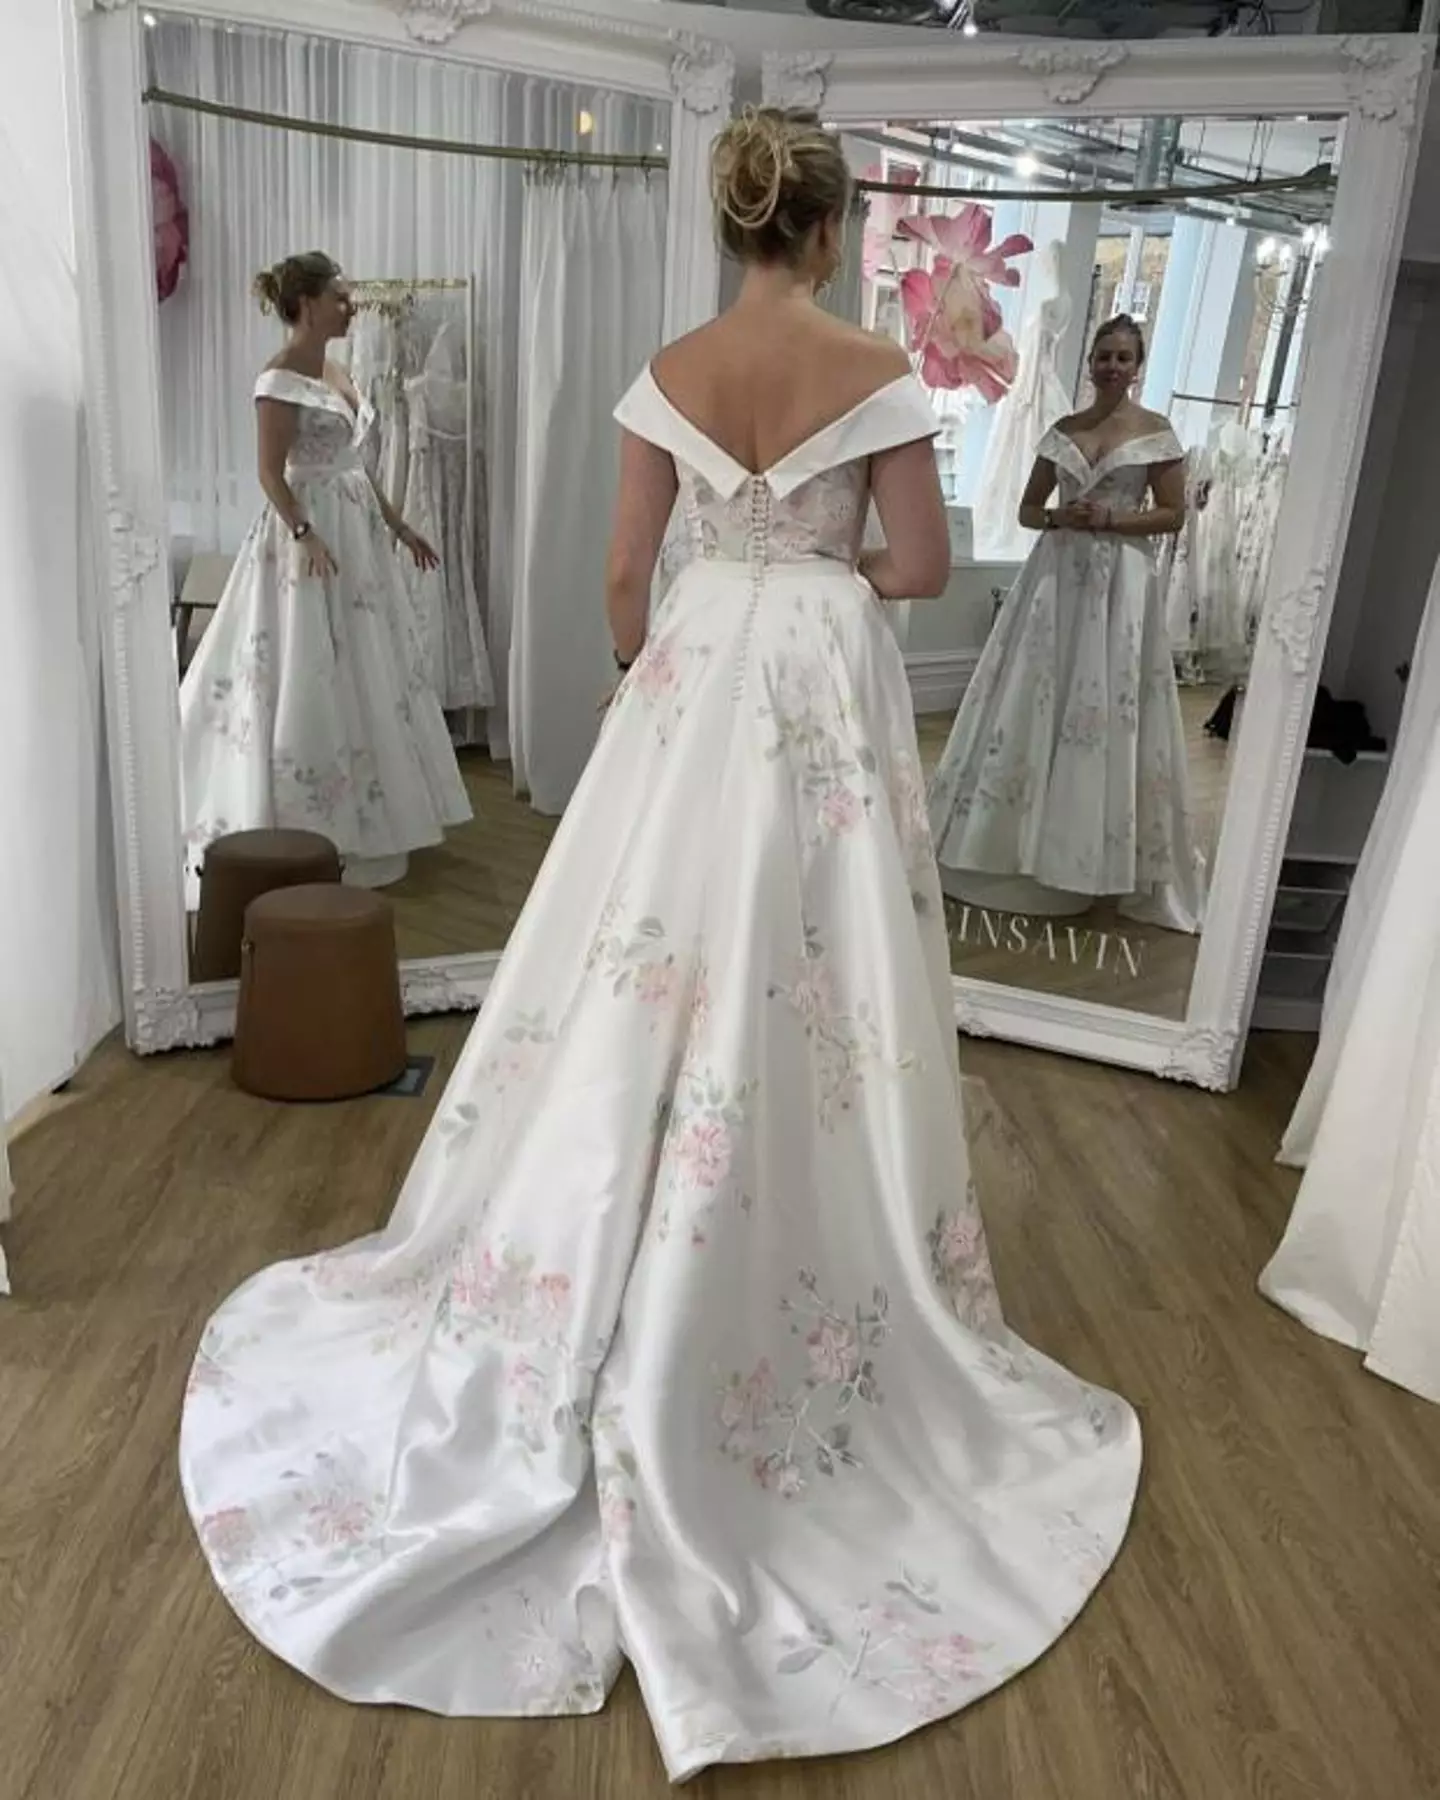 A woman who went wedding dress shopping believes they have accidentally created a 'glitch in the matrix' after her dress showed 'three different realities'.